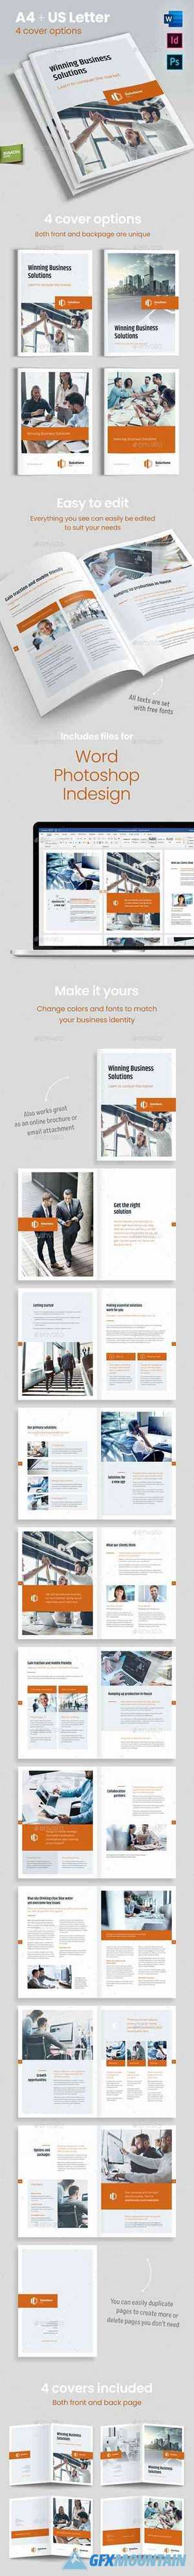 Solutions Inc – Brochure Template for Indesign, Photoshop and Word 24904739